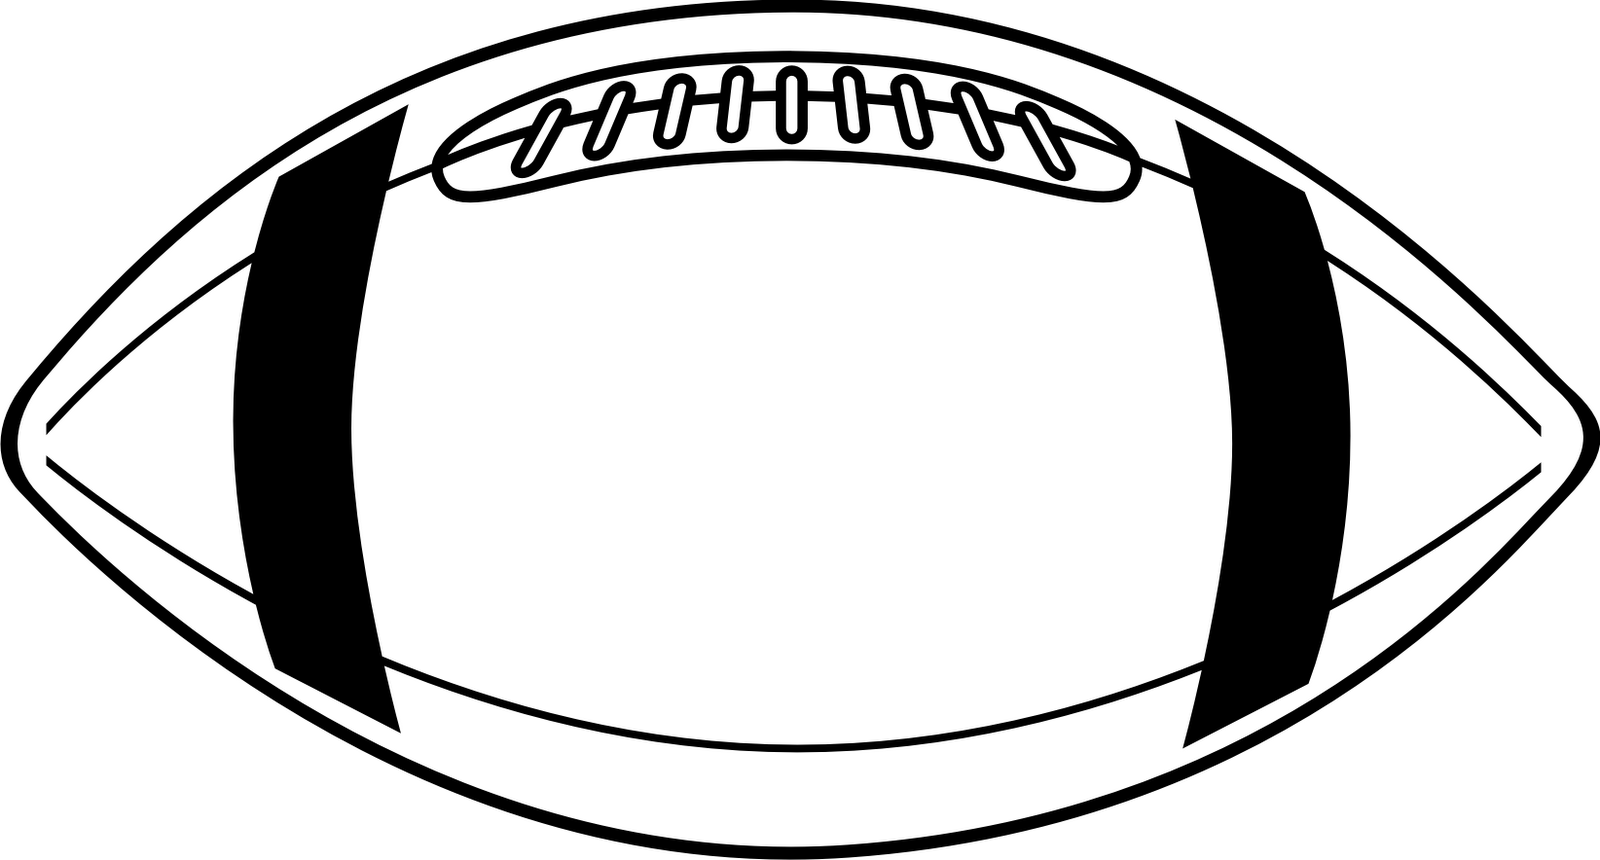 Football Clipart Black And White Football Clip Art Black And White    